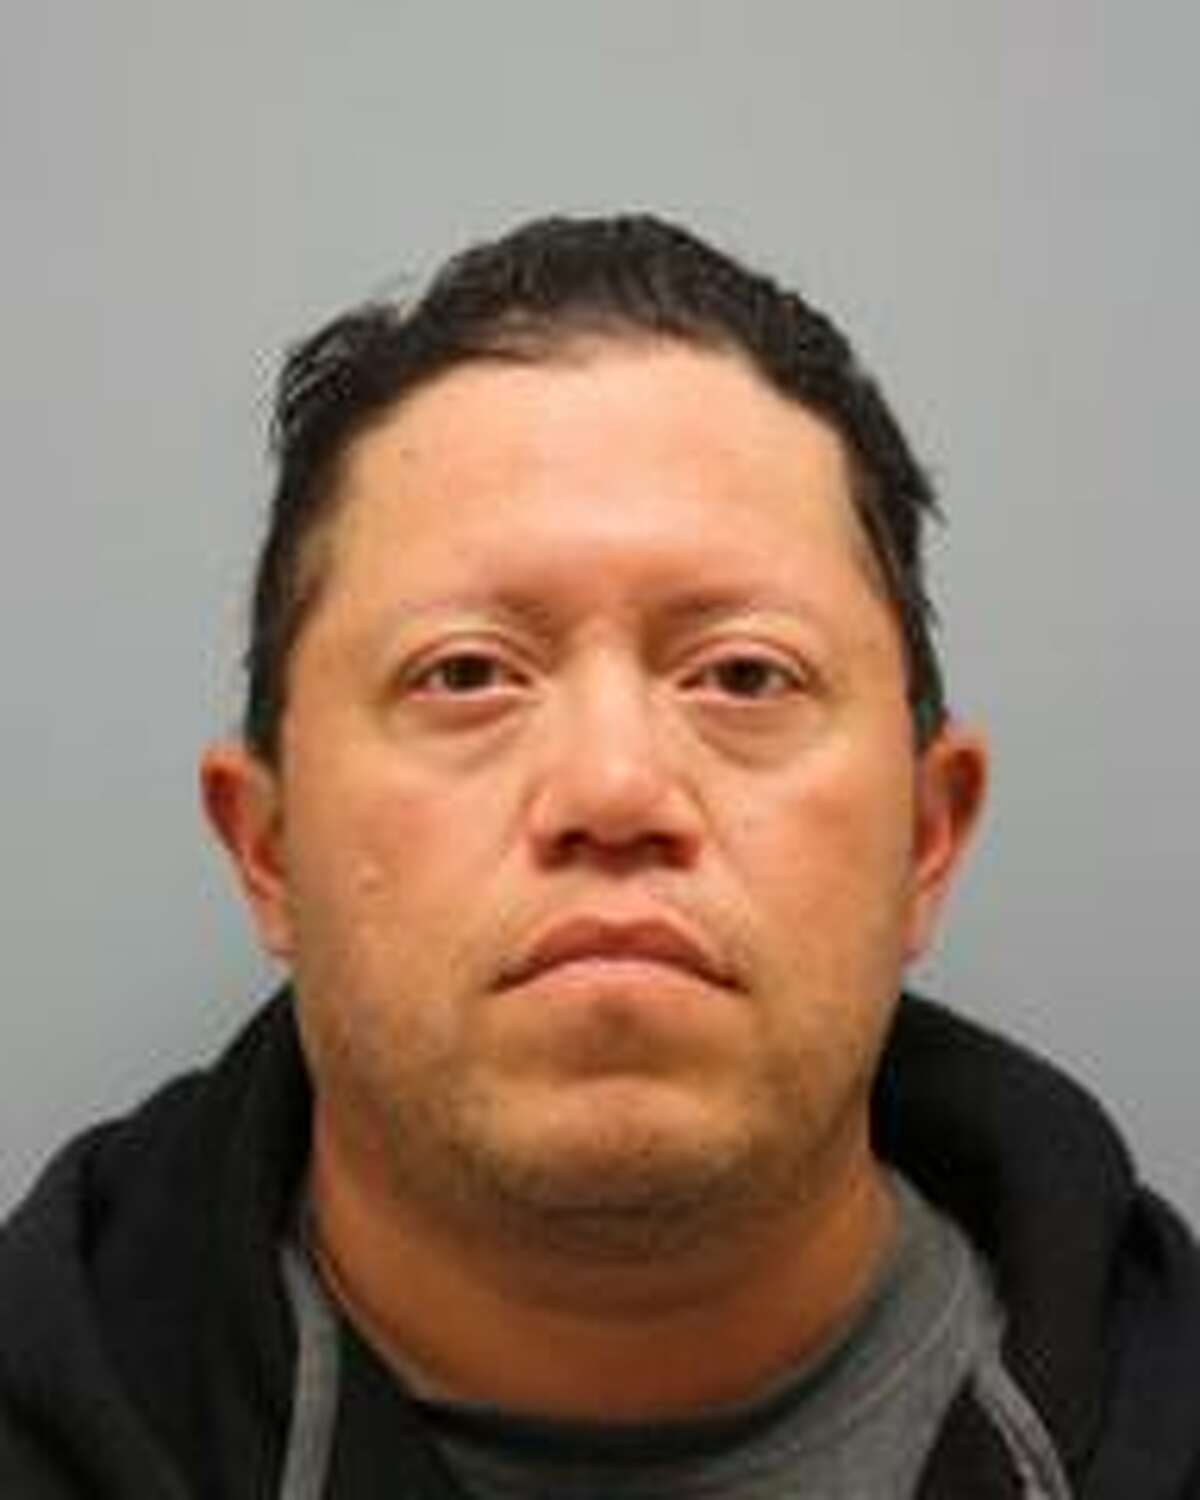 A 43-year-old homeowner has been charged with murder after shooting and killing a 14-year-old girl who came to his home earlier this summer, according to a news release from the Harris County Sheriff's Office. Anthony Valle, 43, told police that he shot an "unknown intruder" and Harris County Precinct 4 patrol deputies were dispatched on July 20 to his home in the 19920 block of River Brook Drive.